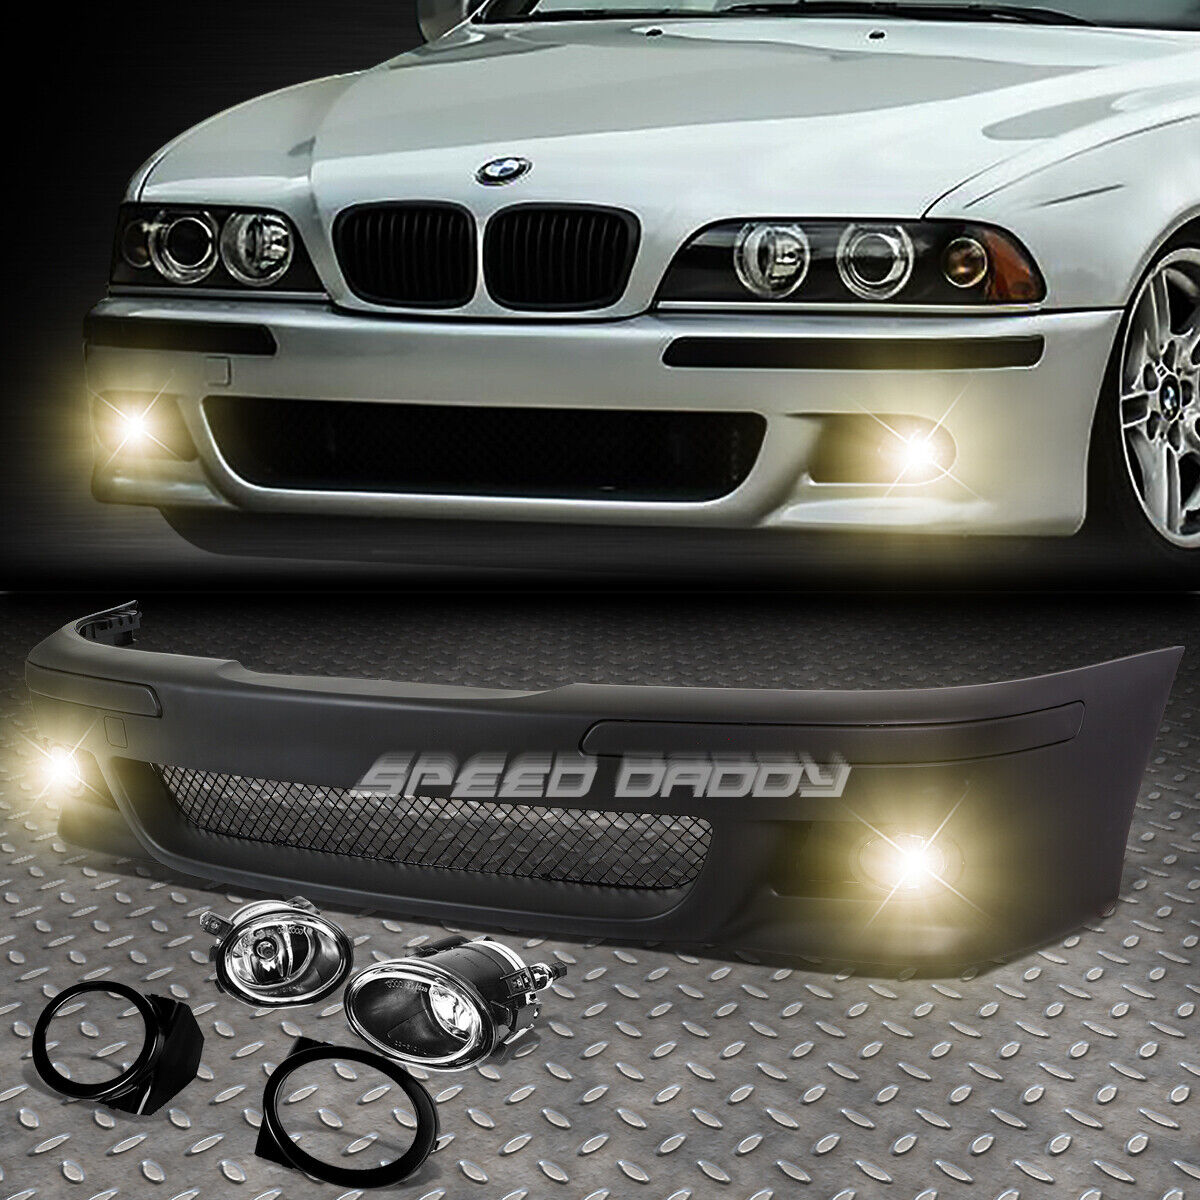 FOR 96-03 BMW E39 5SERIES M5 STYLE REPLACEMENT FRONT BUMPER BODY KIT+FOG LIGHT